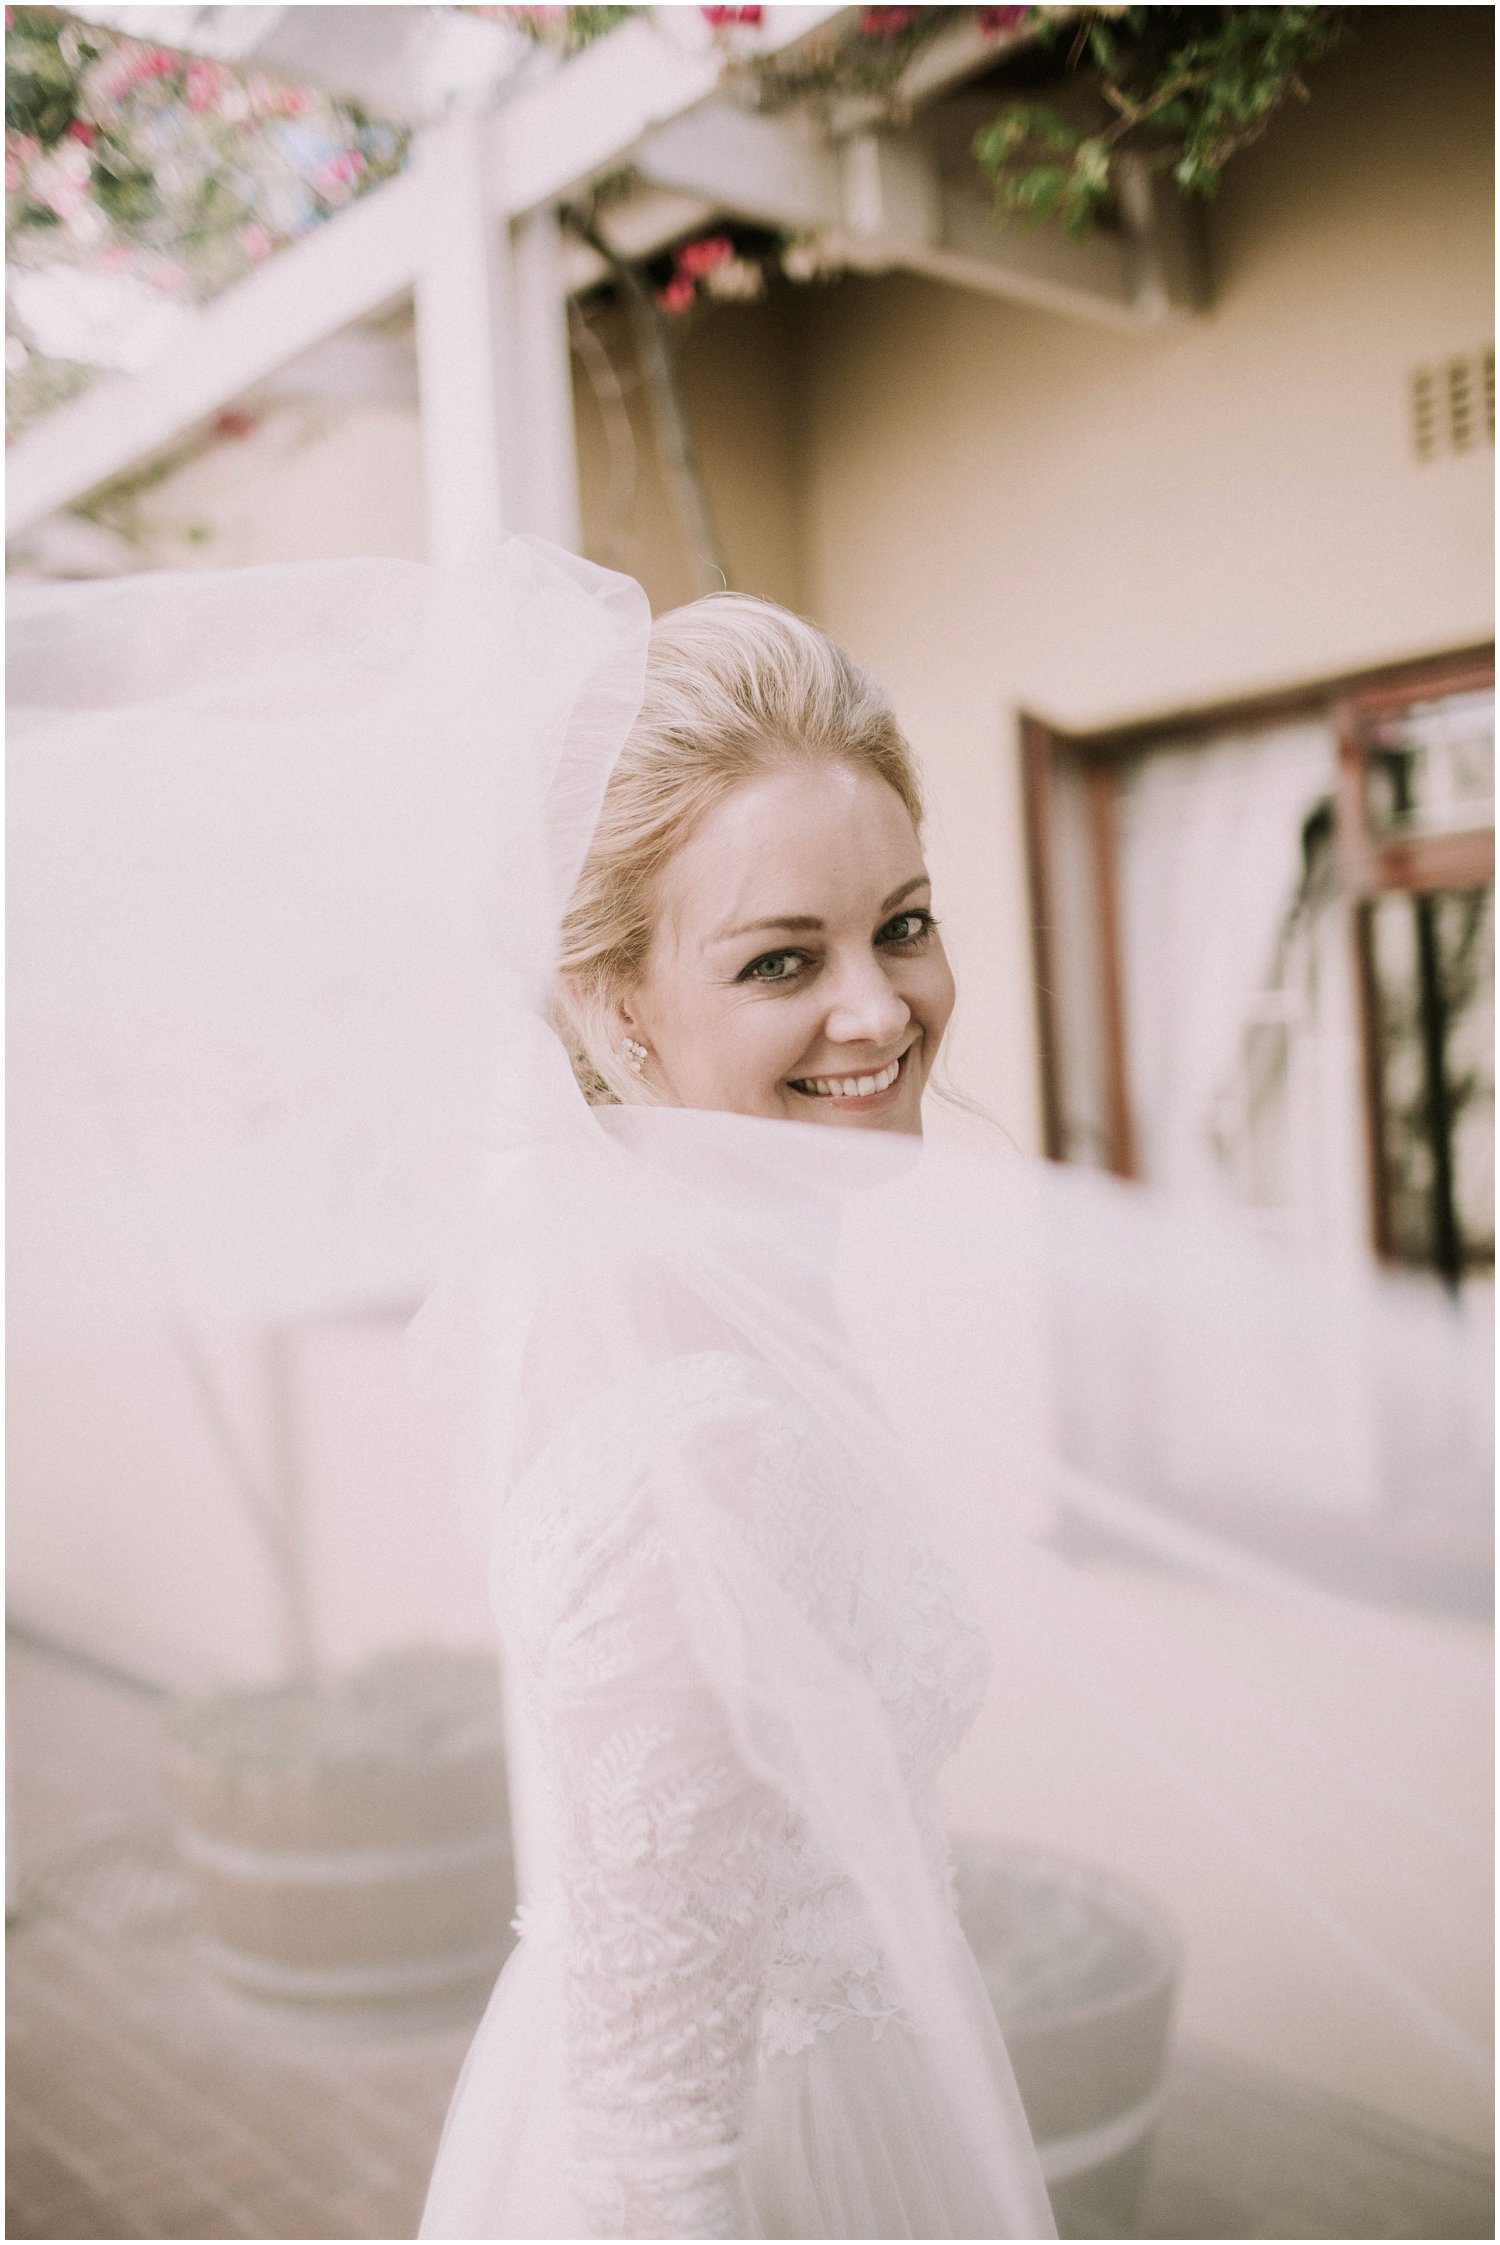 Top Wedding Photographer Cape Town South Africa Artistic Creative Documentary Wedding Photography Rue Kruger_0675.jpg